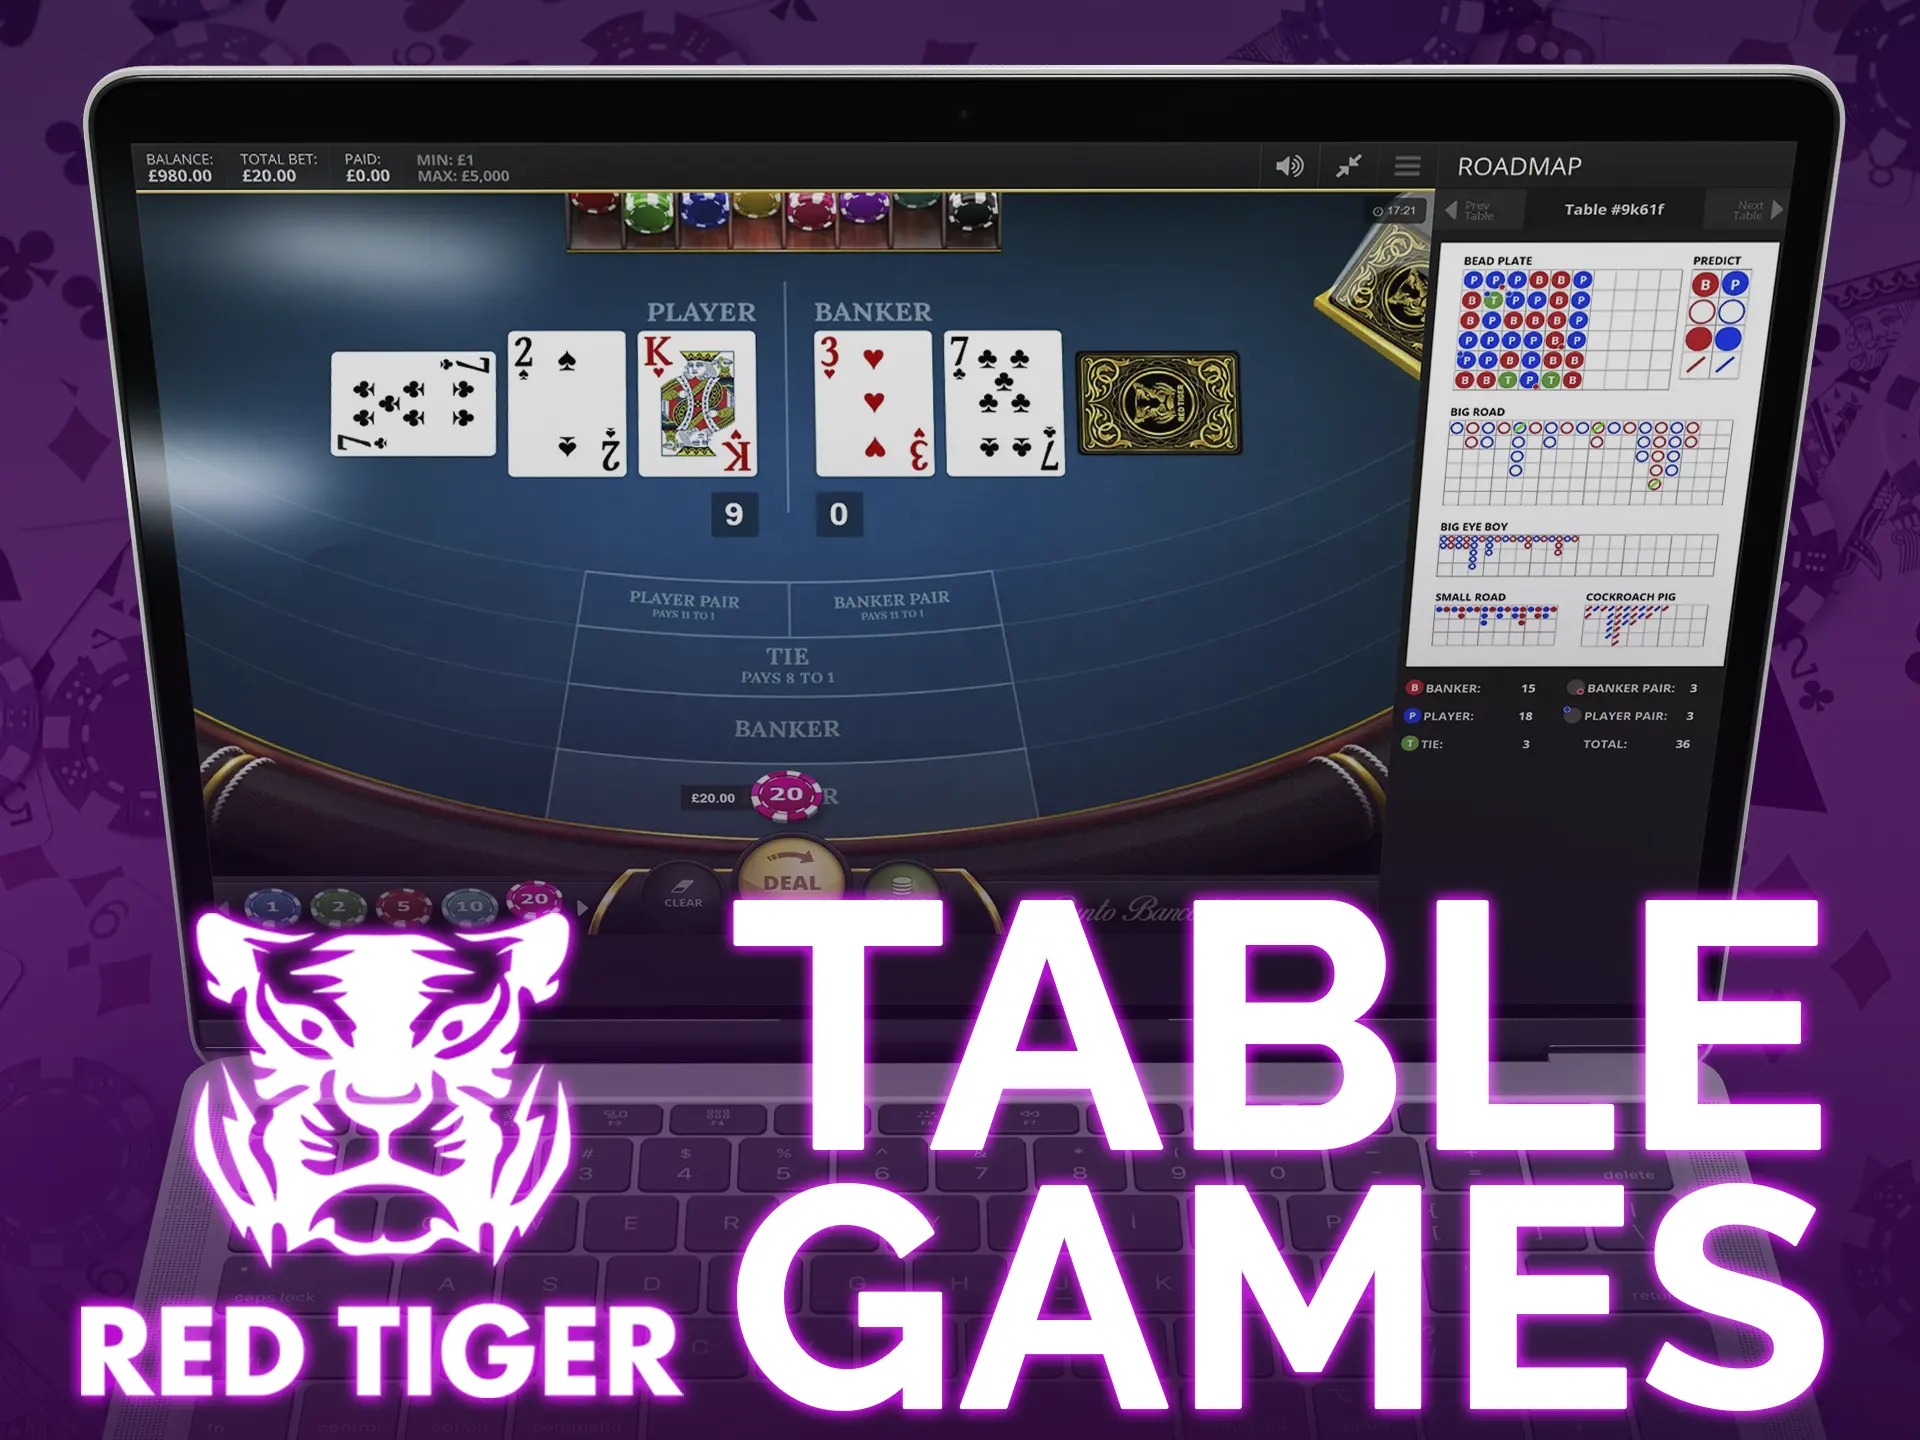 Red Tiger's portfolio features high-quality card and table games, including European Roulette, Classic Blackjack, Punto Banco, and Deal Or No Deal.